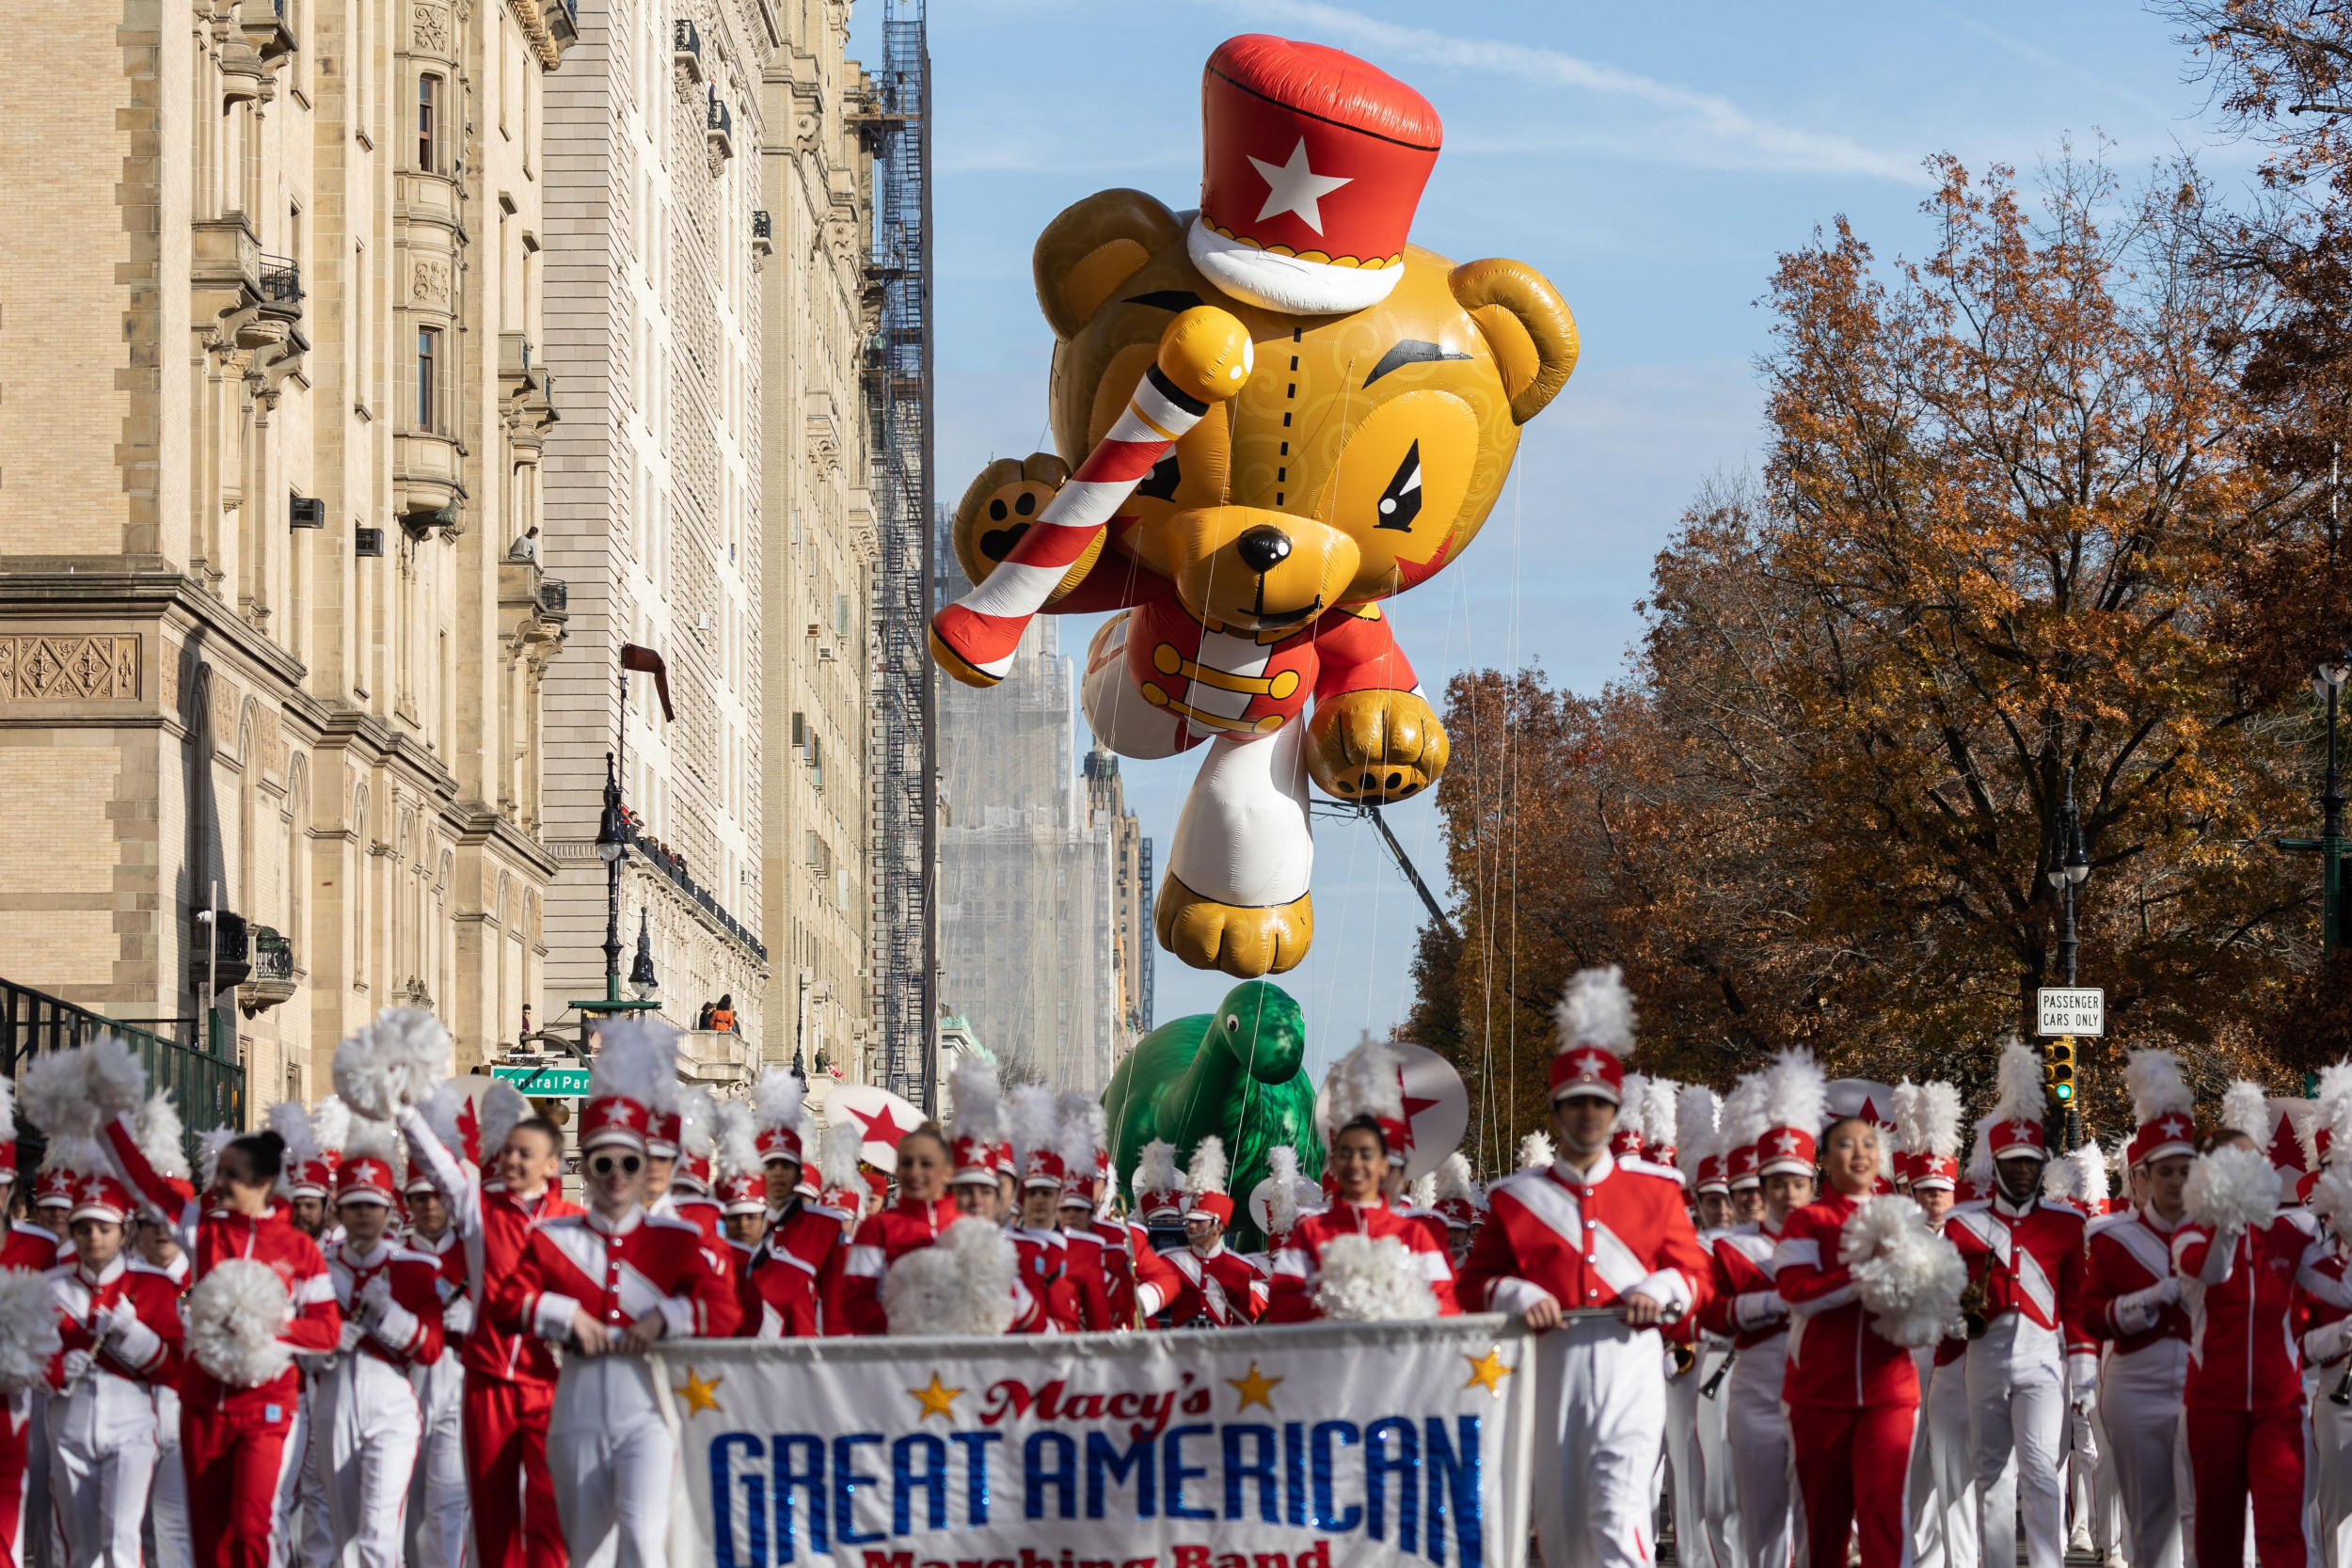 Macy's Thanksgiving Day Parade 2022 Date, Route and Schedule